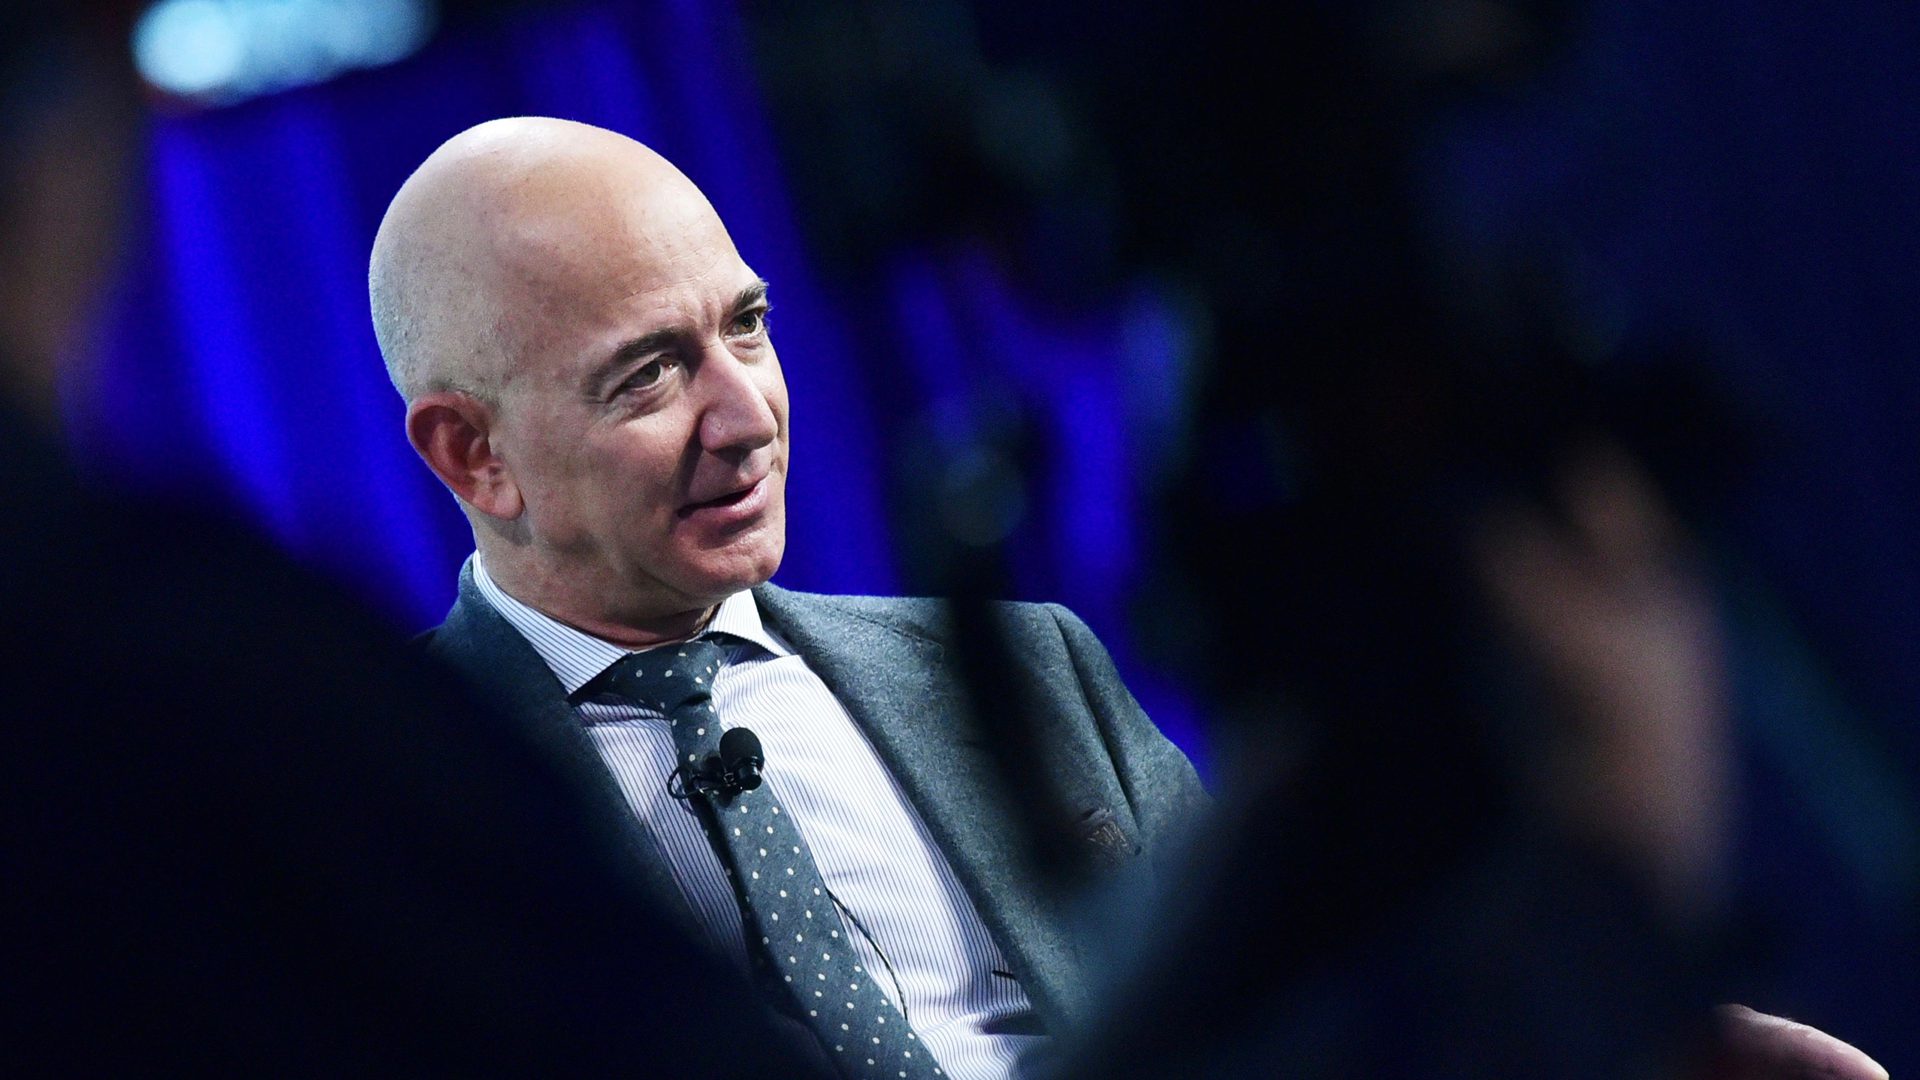 Jeff Bezos on learning from failure